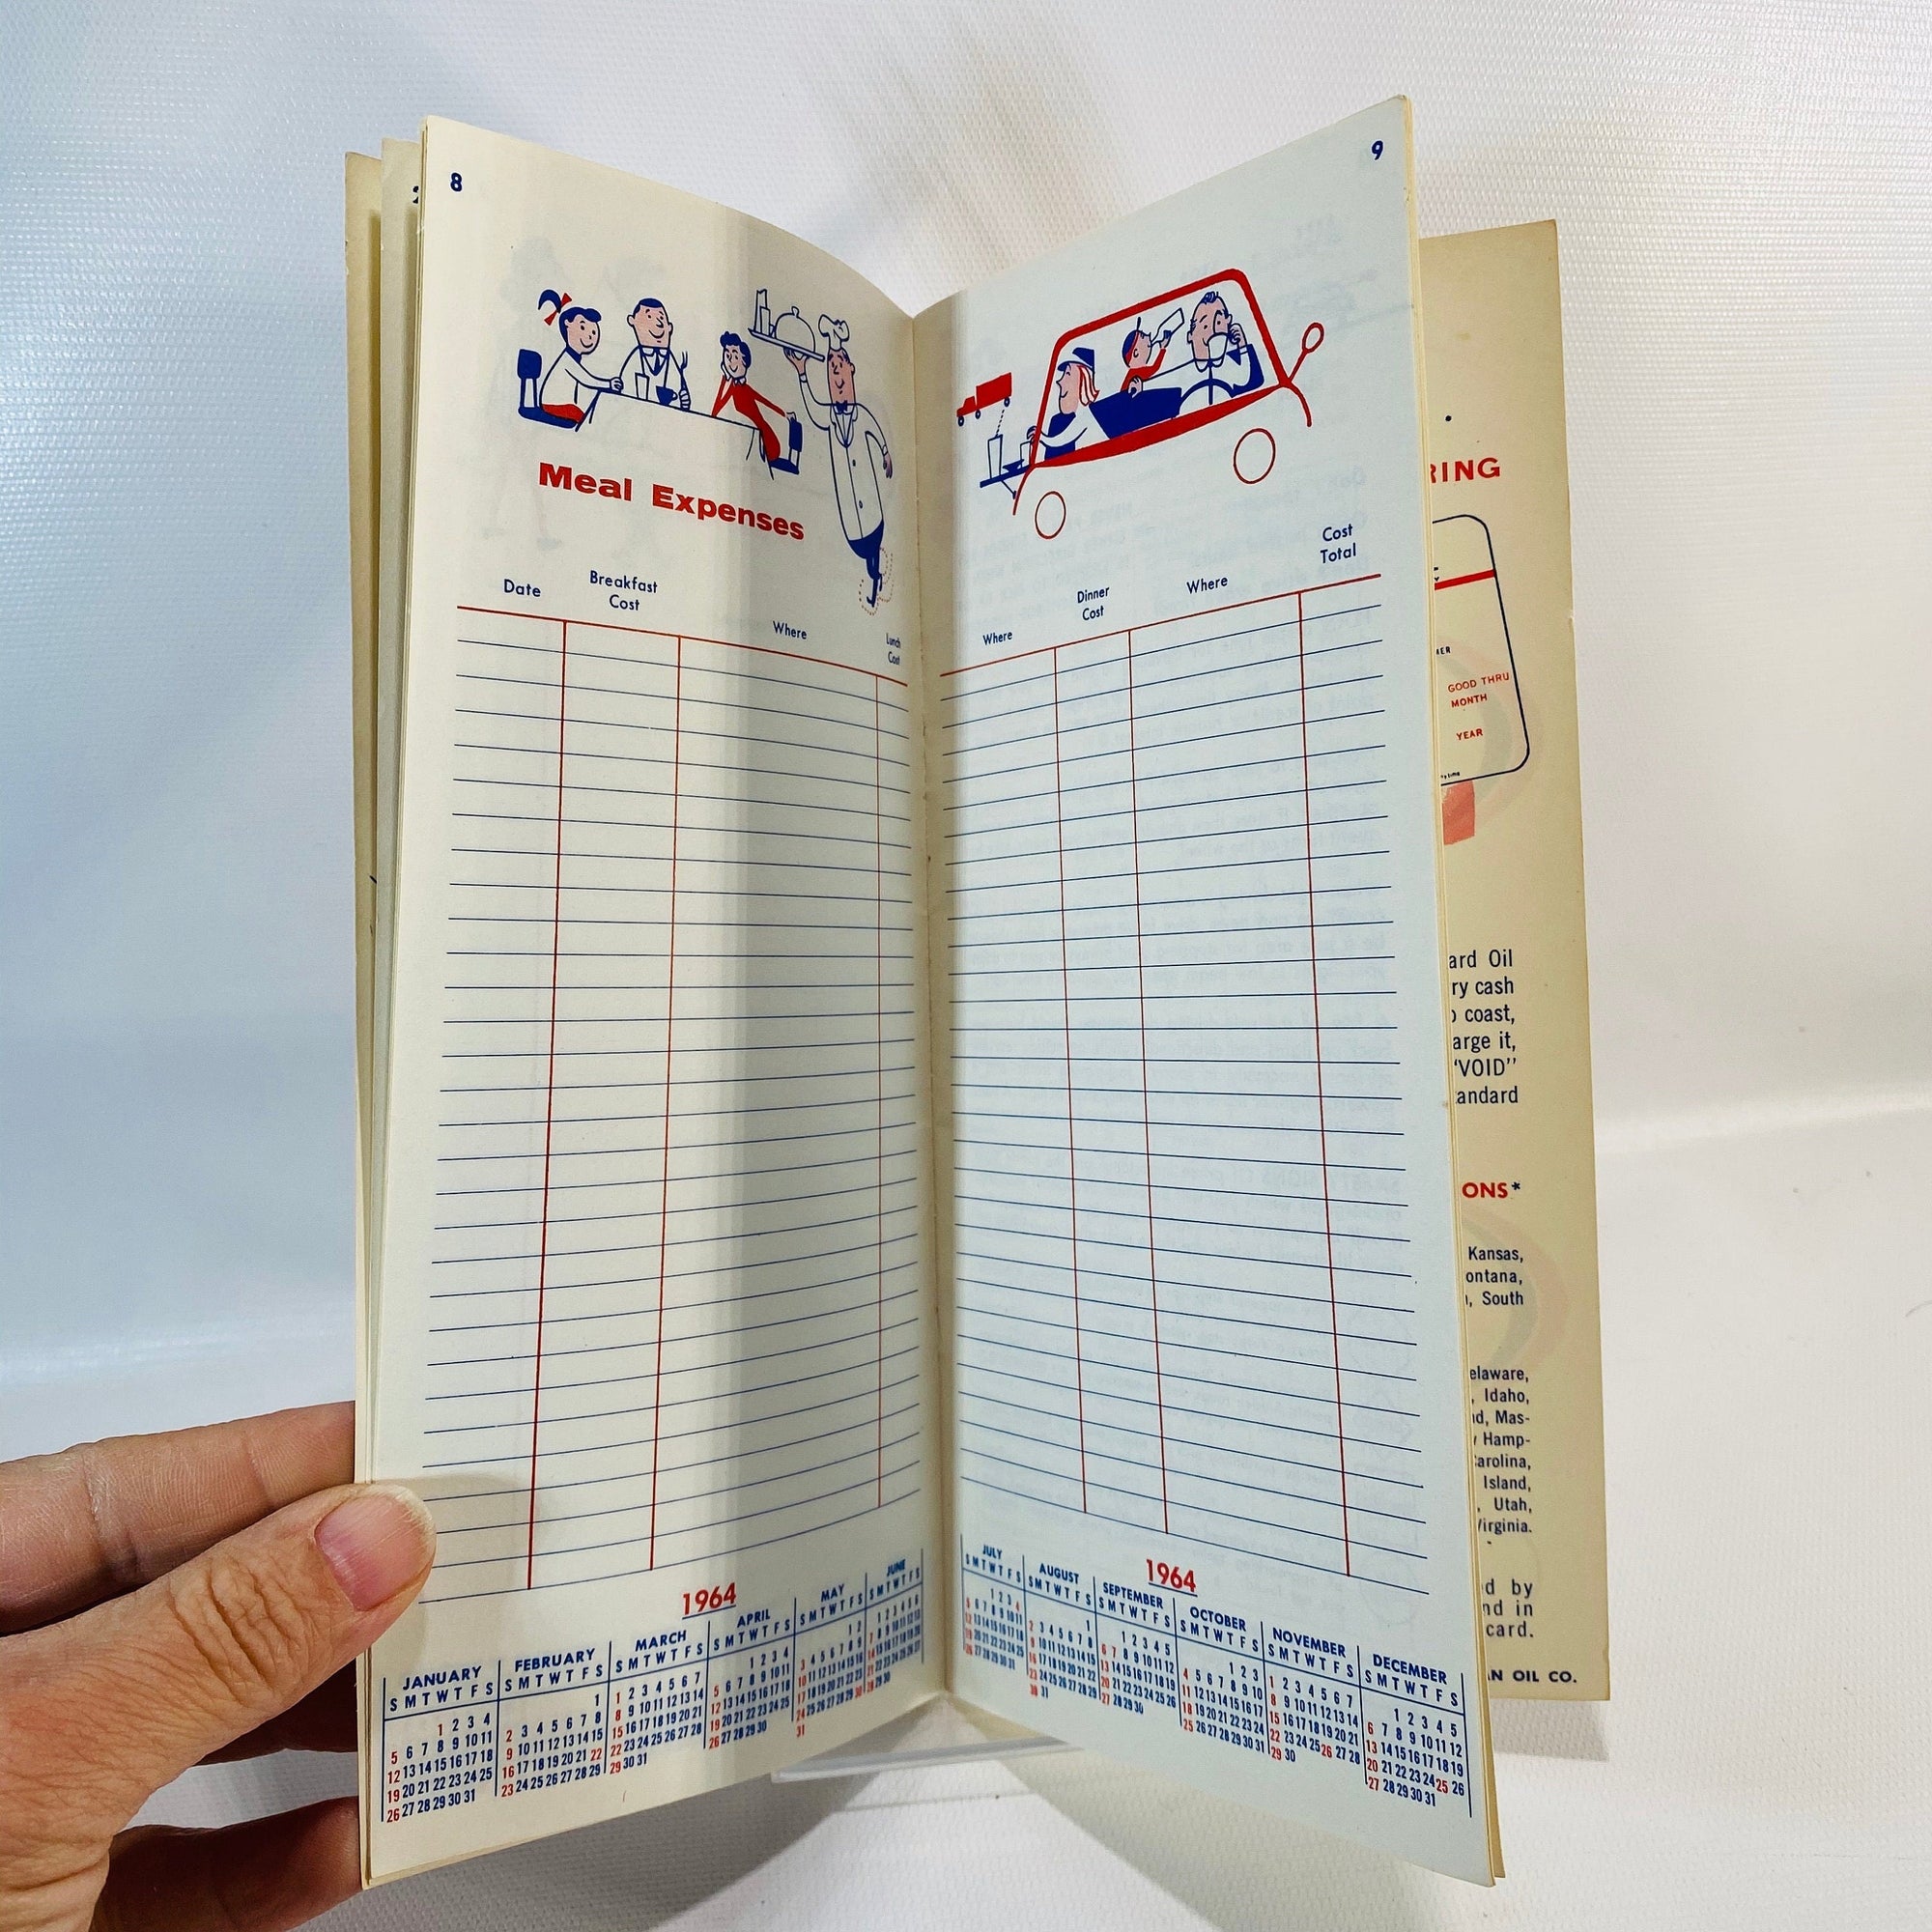 Adventure Road Touring  Information and Expense Record by Standard American Oil Company 1962